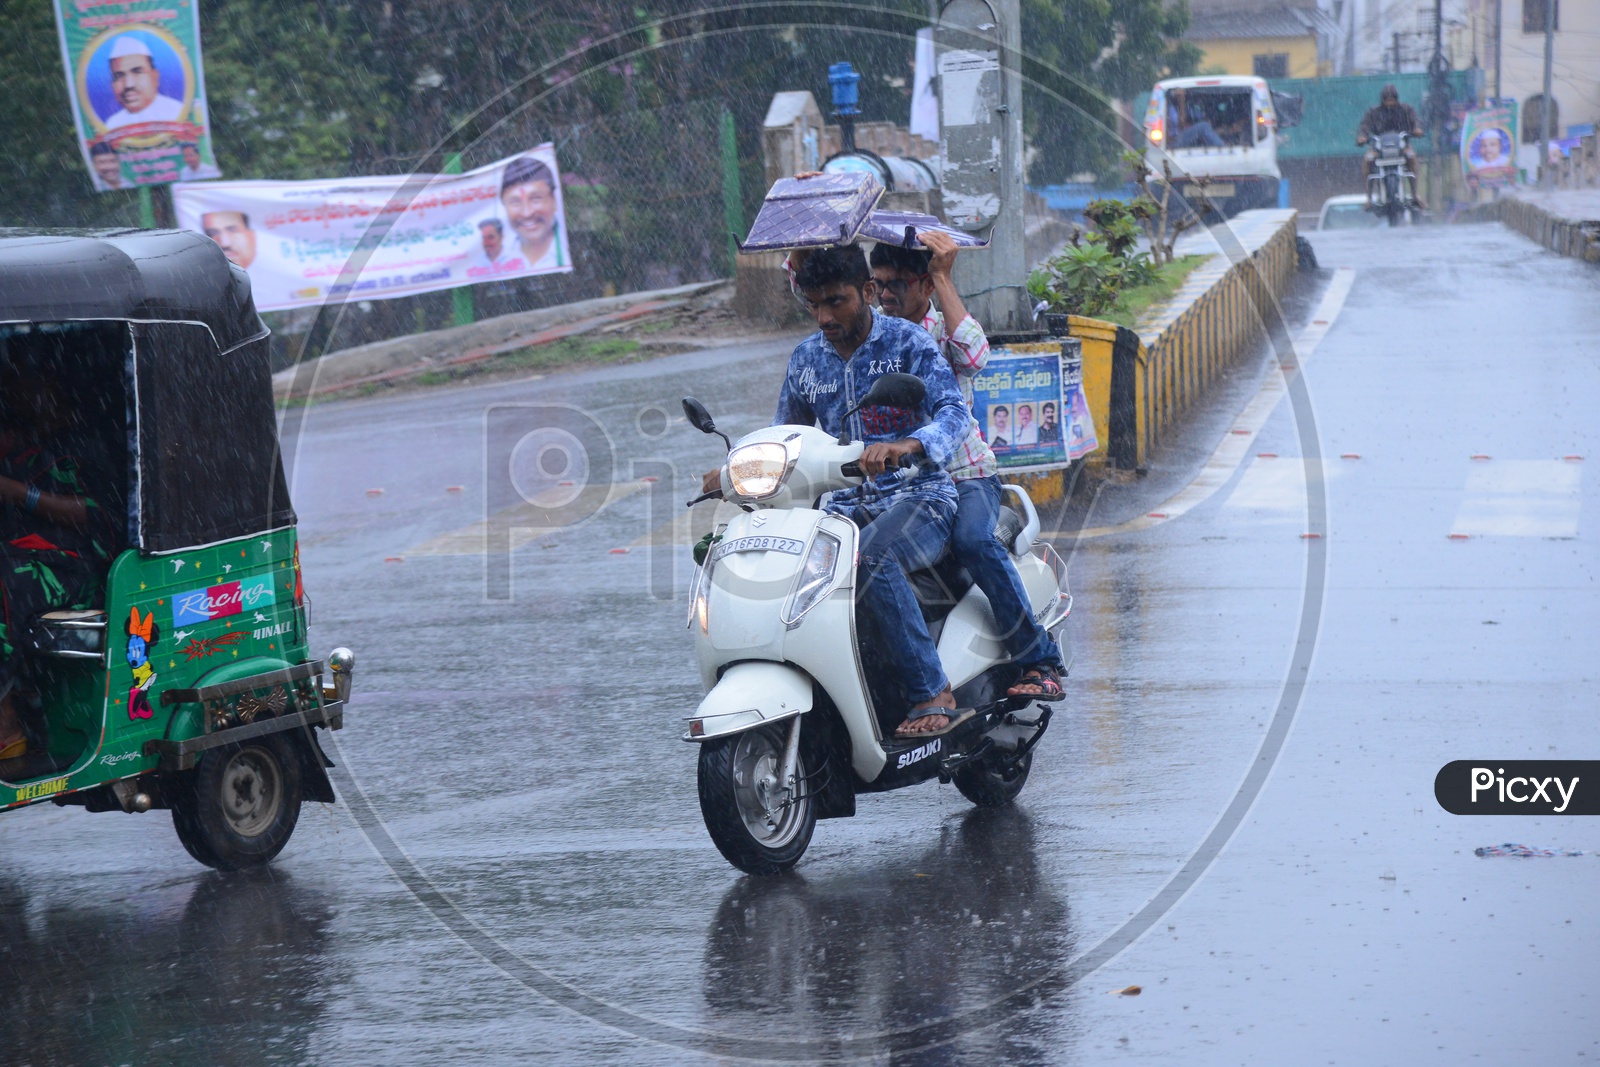 Biker on the road while its raining